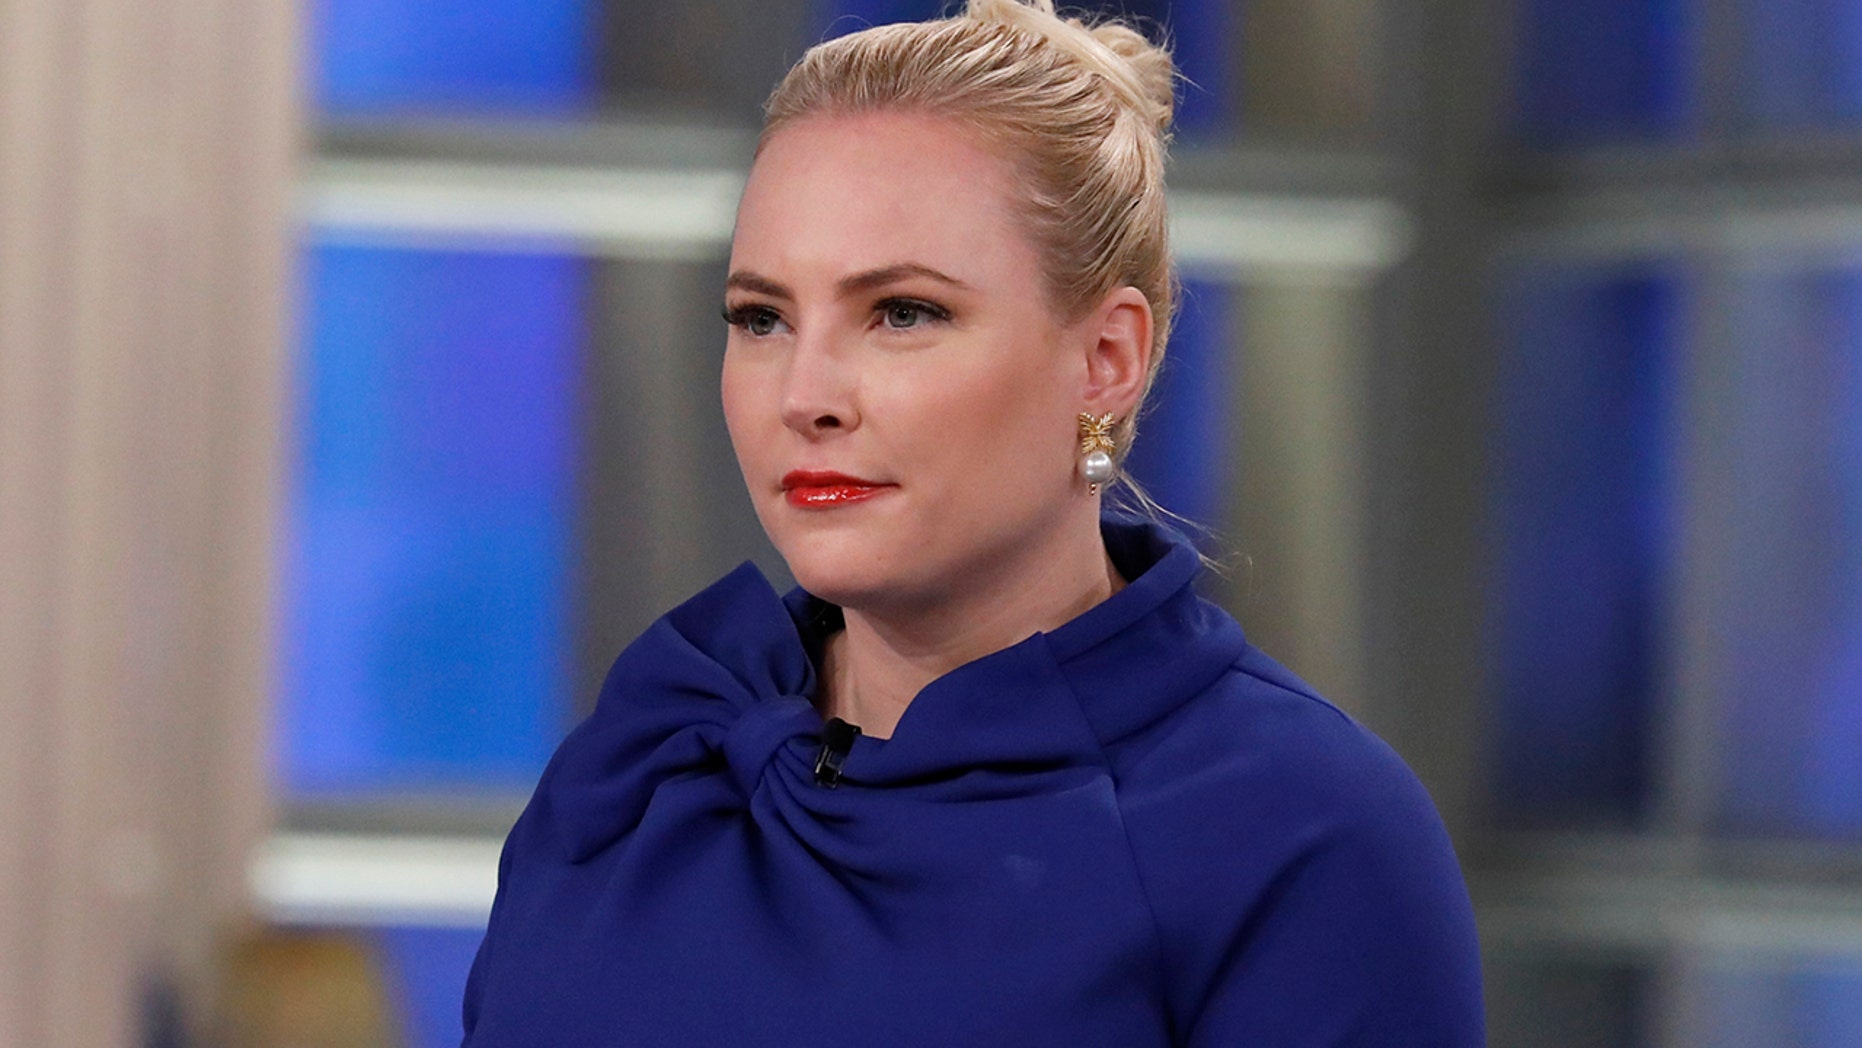 “The View” co-host Meghan McCain apologized after spoiling the finale of “Game of Thrones.”